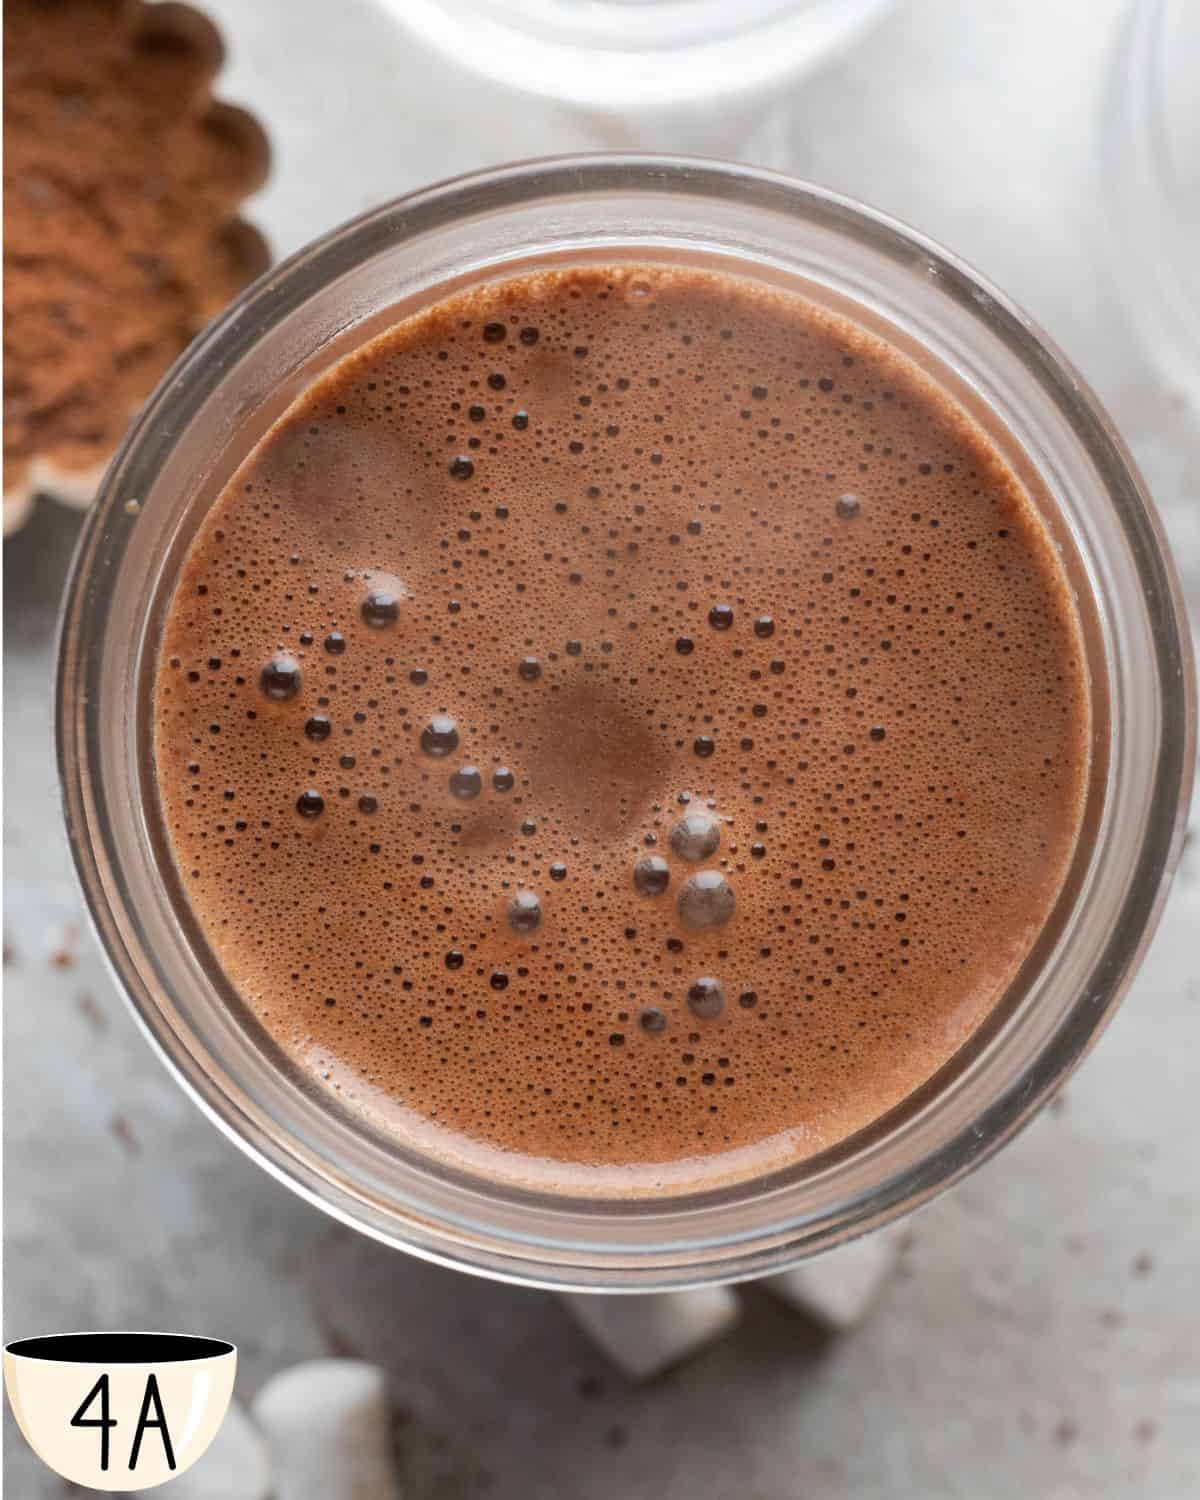 A glass jar viewed from above, filled with rich and smooth oat milk hot chocolate. The surface is covered with small, delicate bubbles from the warmth of the freshly mixed beverage, indicating it's ready to be enjoyed.